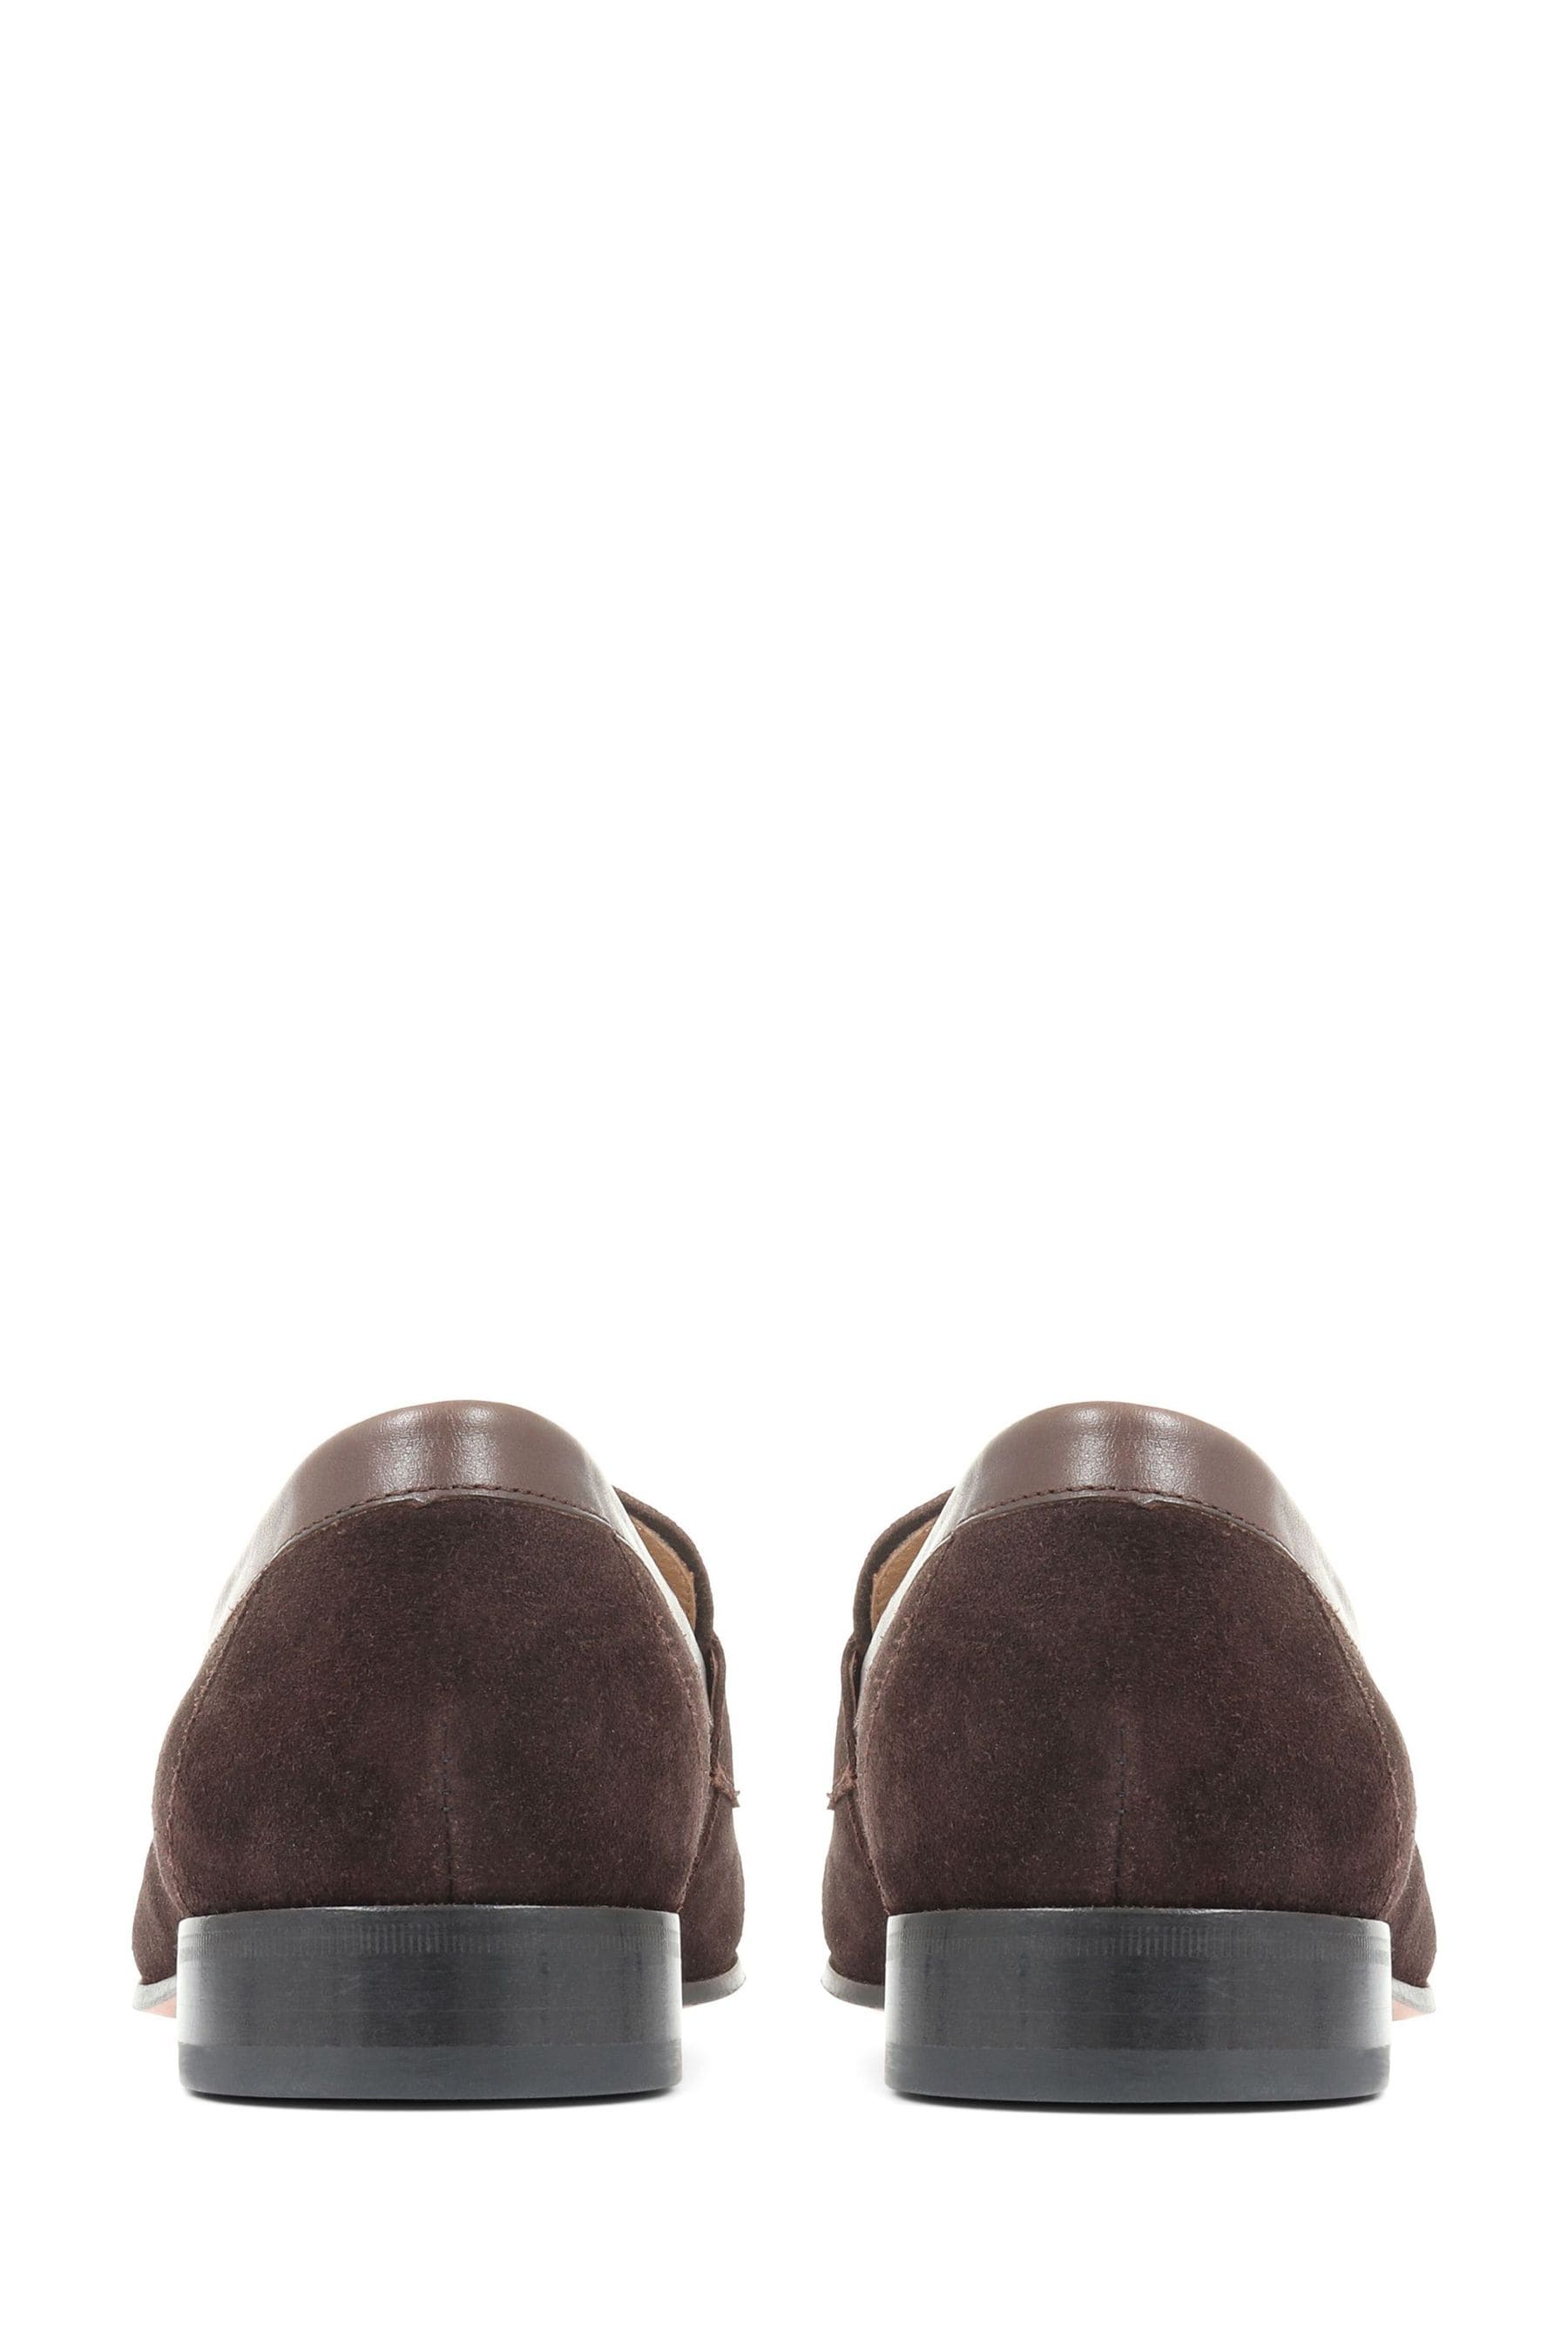 Buy Jones Bootmaker Roscoe Brown Suede Penny Loafers from the Next UK ...